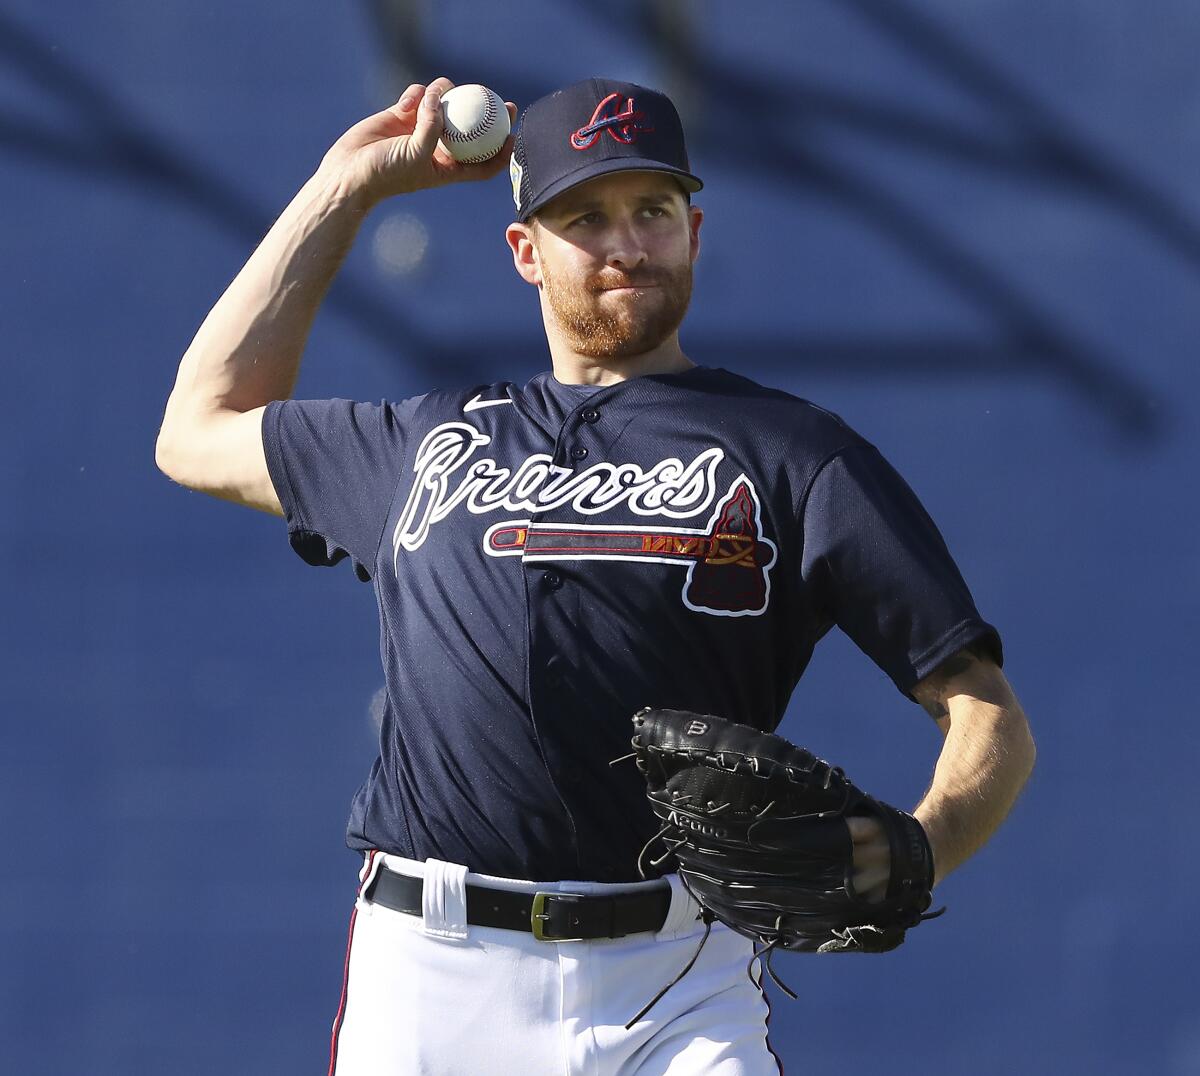 Braves reliever Matzek ruled out of postseason due to Tommy John surgery